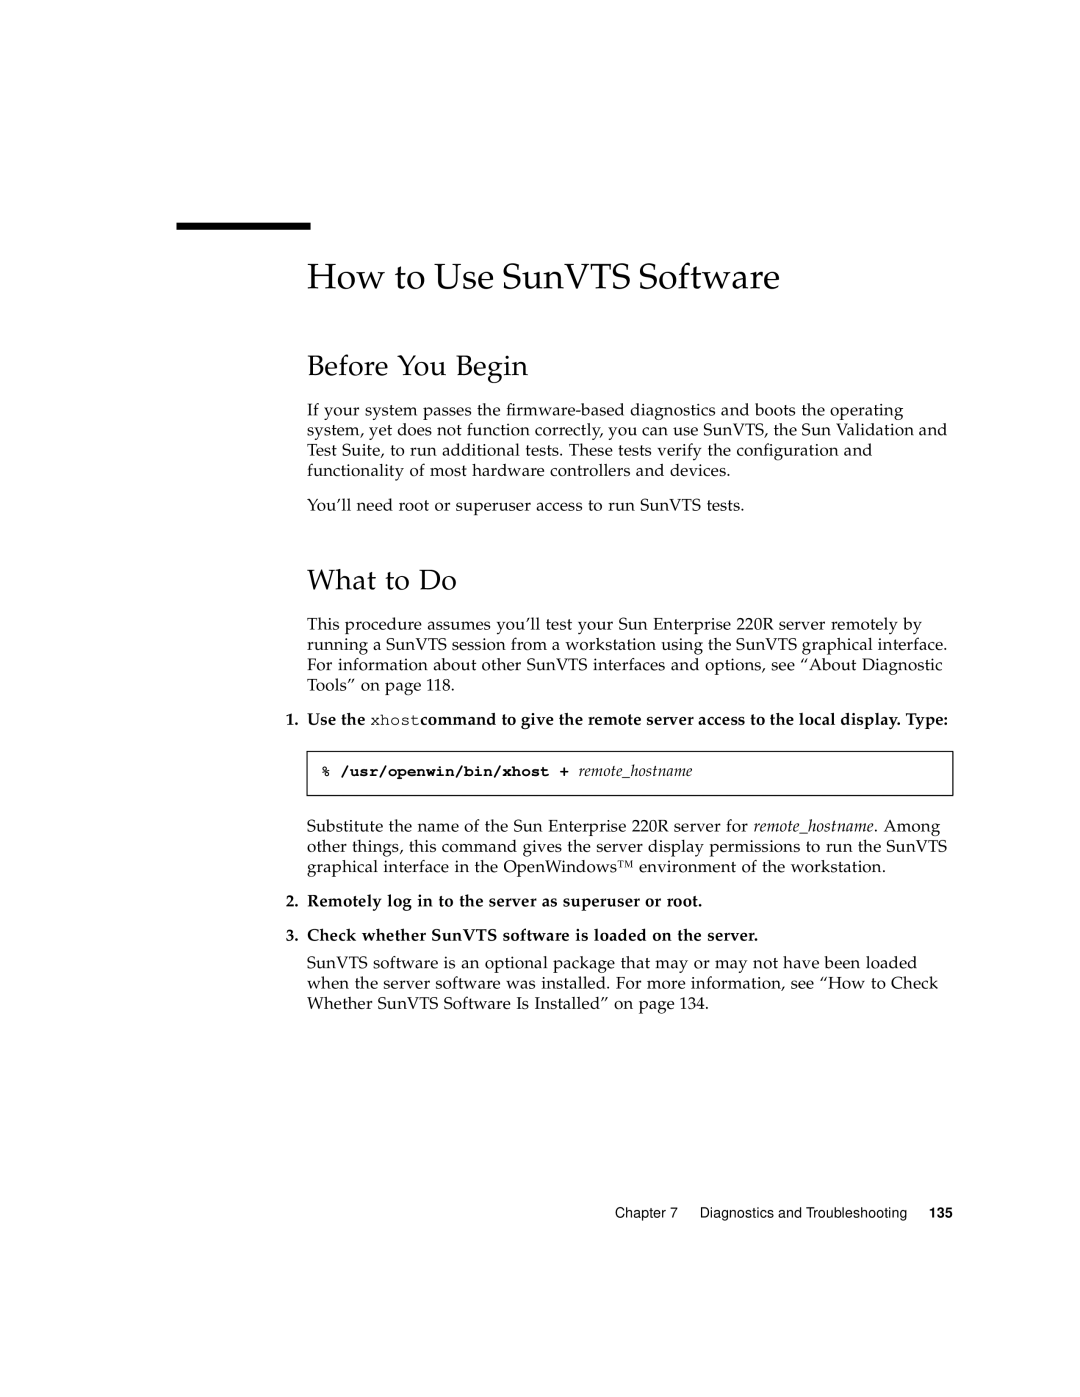 Sun Microsystems 220R How to Use SunVTS Software, Remotely log in to the server as superuser or root, Before You Begin 